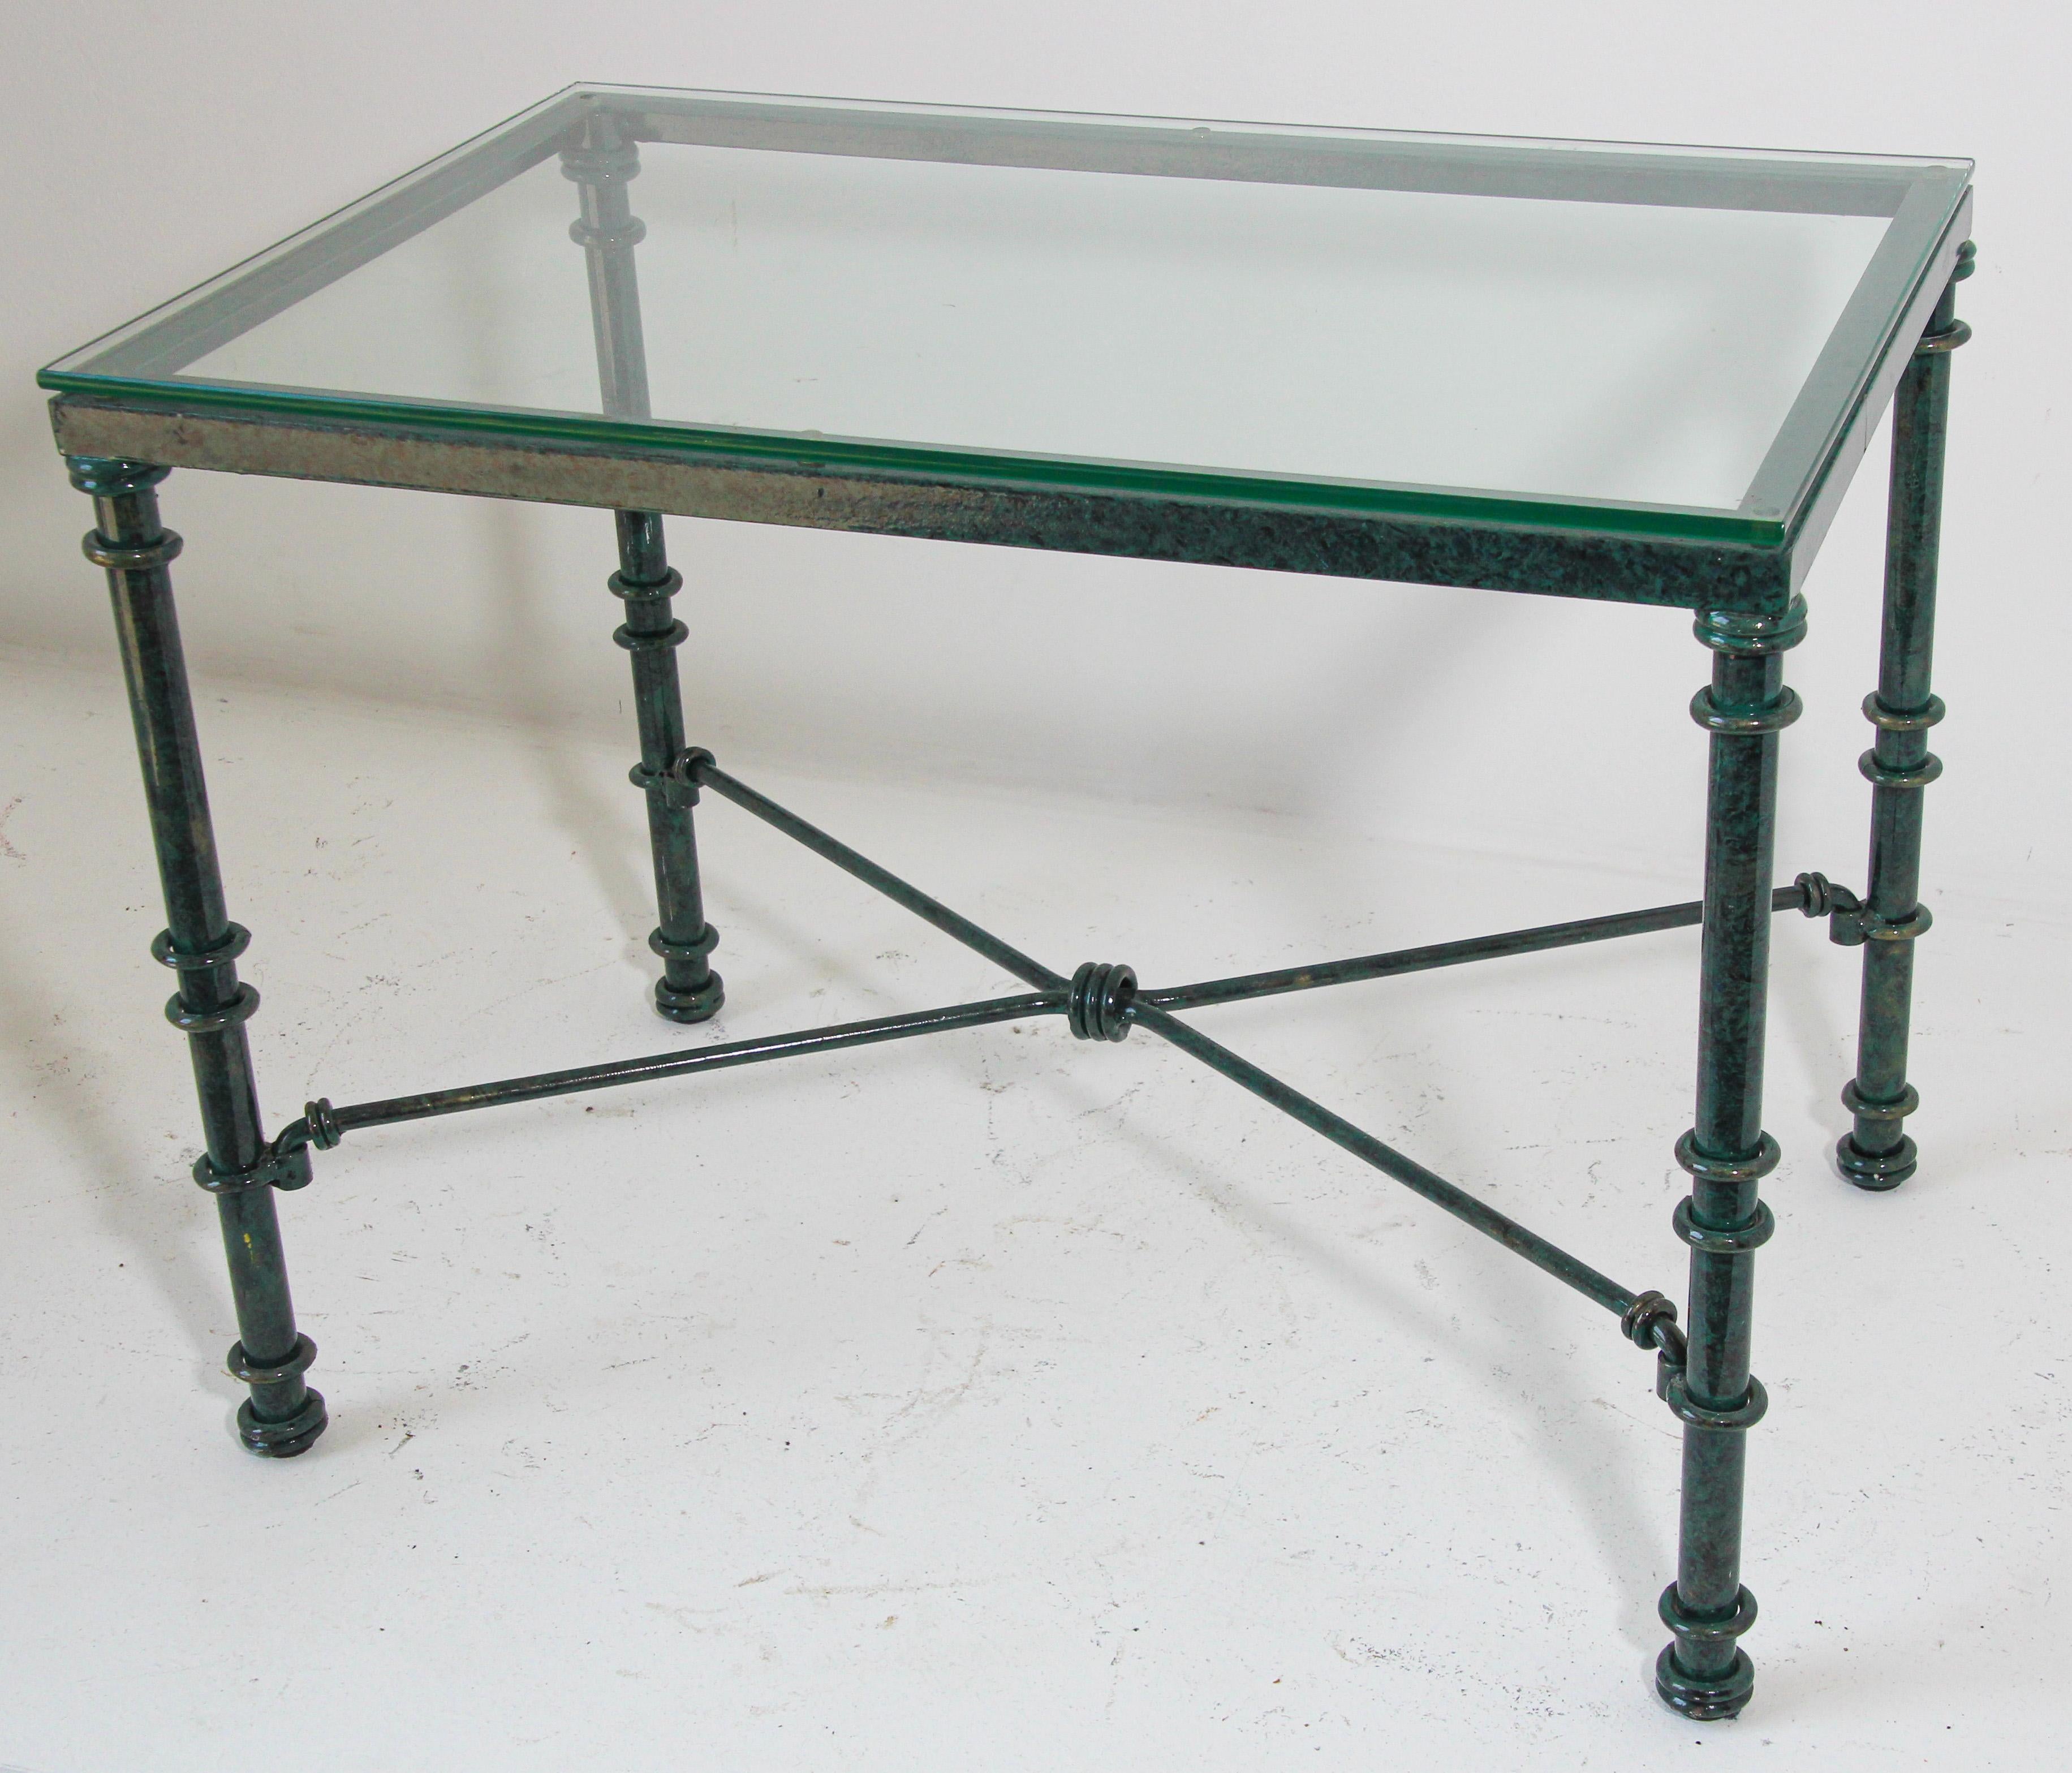 Giacometti inspired metal and glass top coffee table with verdigris style finish paint patina.

Vintage coffee table, with patinated painted aluminum forged base with a removable center 